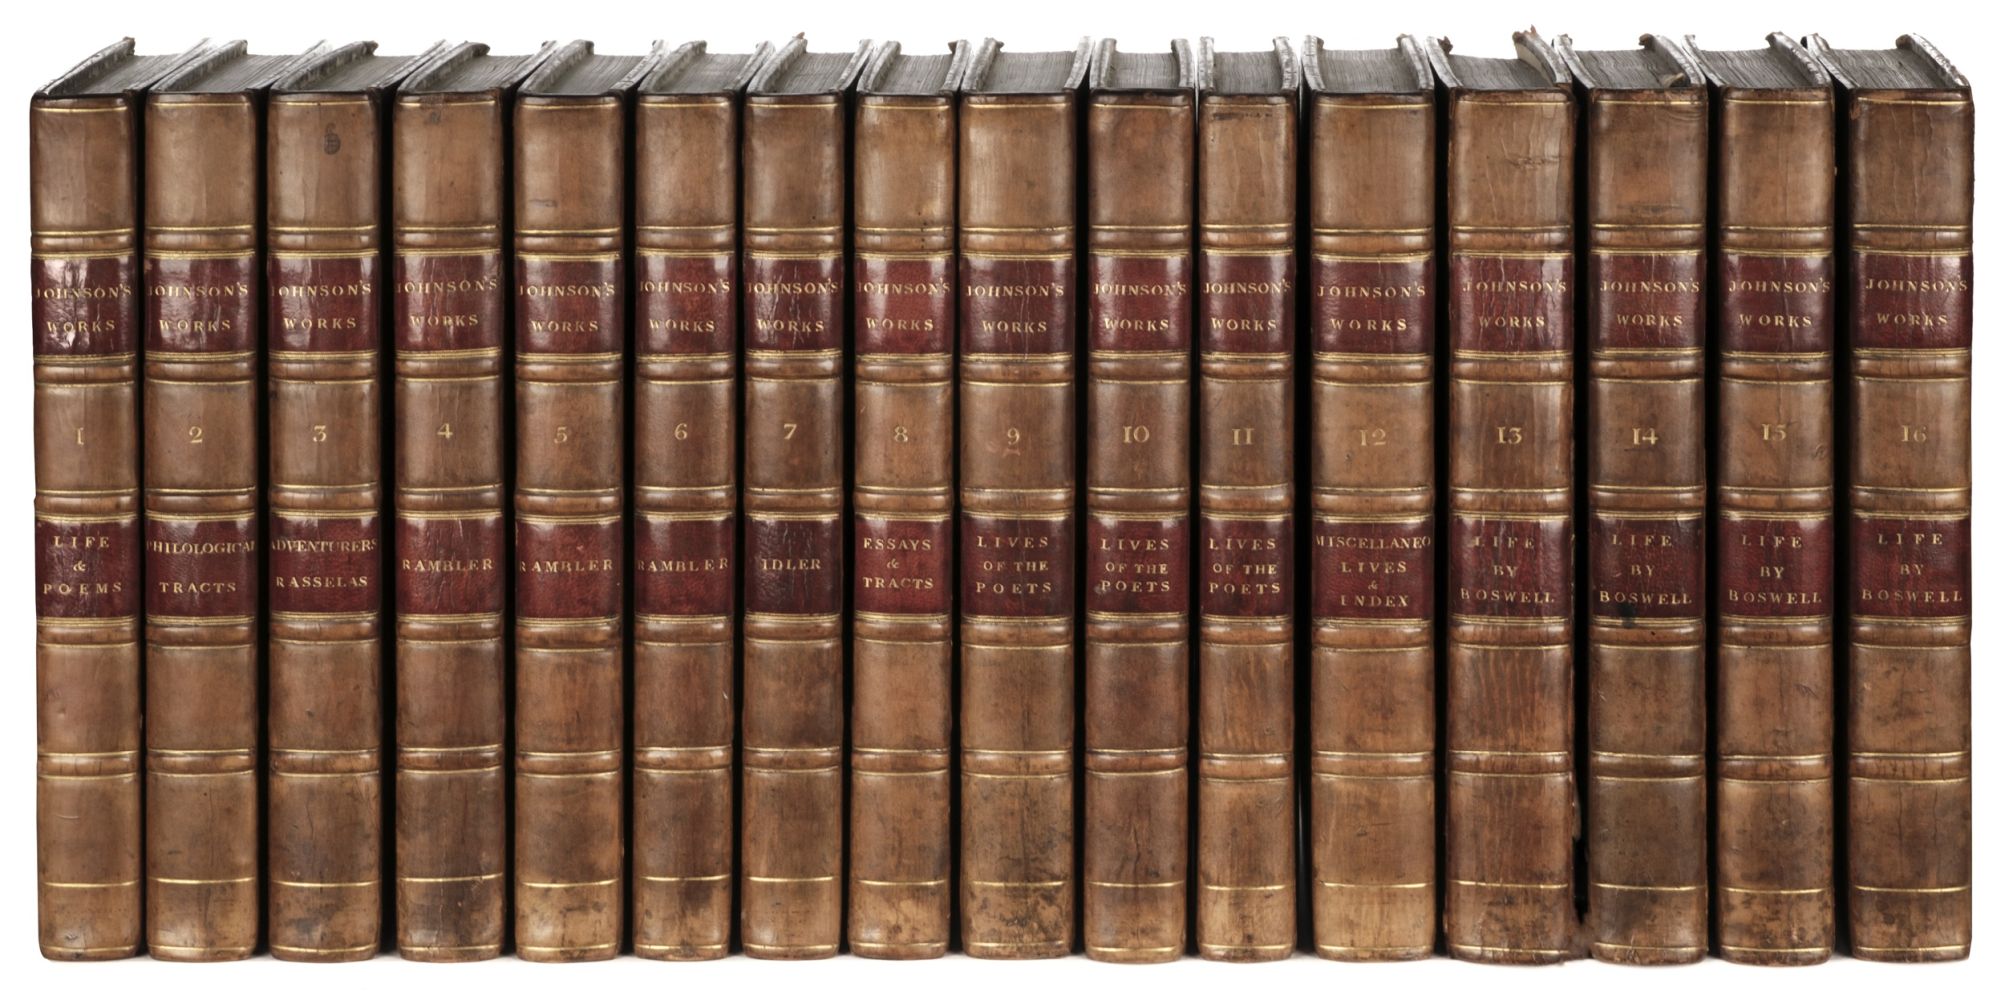 Johnson (Samuel). The Works, & Boswell, Life of Johnson, 16 volumes, 1816, finely bound